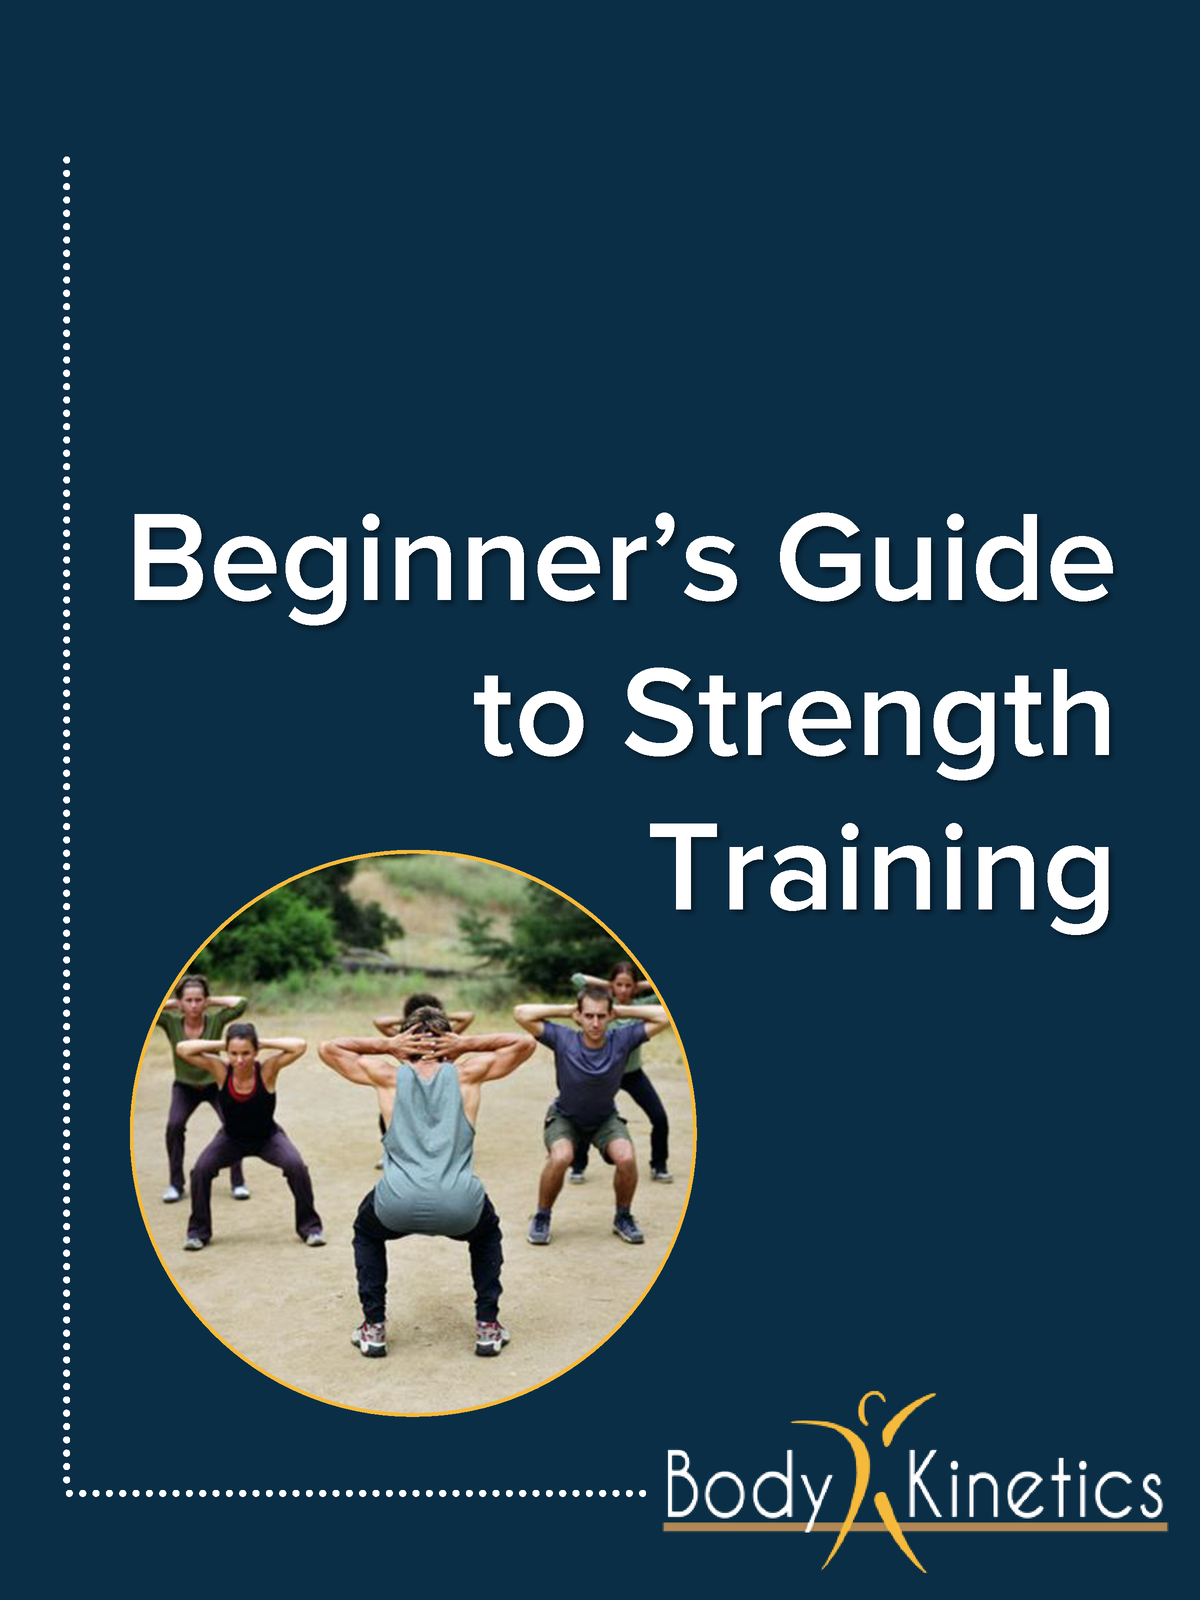 beginners-guide-to-strength-training-beginner-s-guide-to-strength